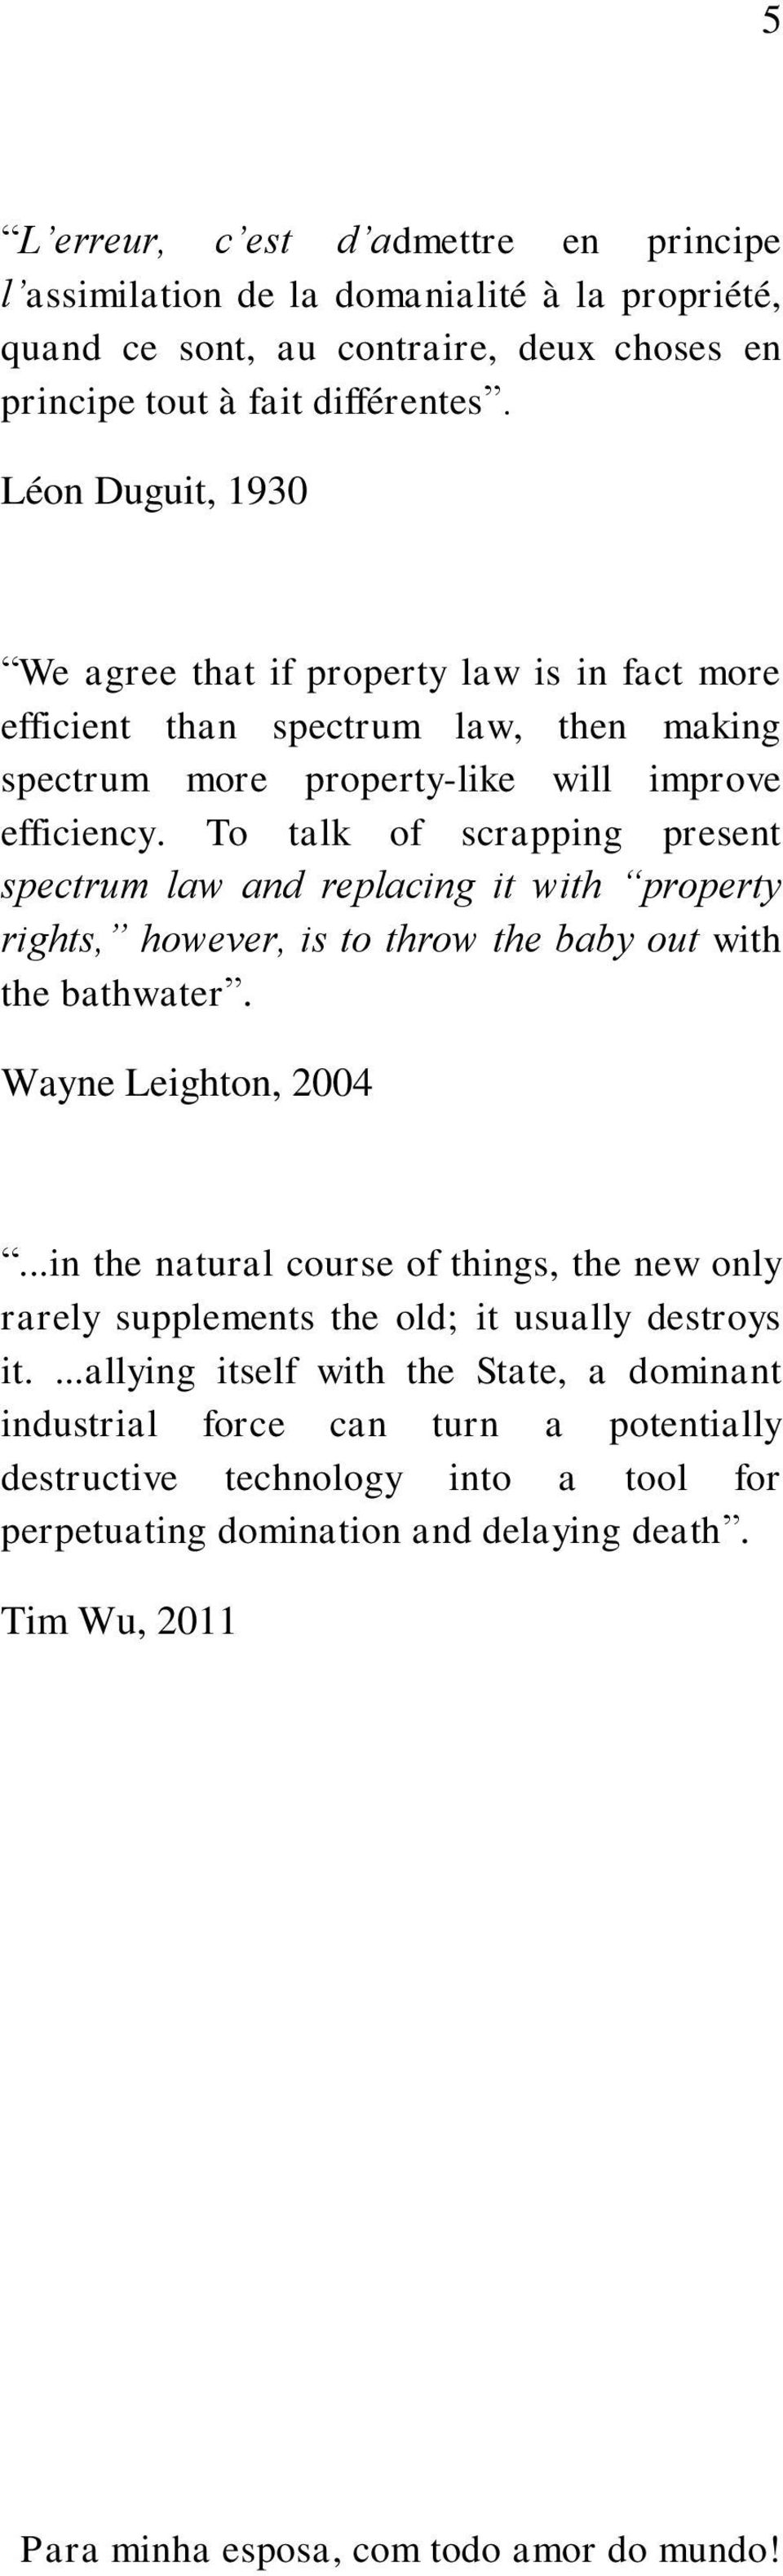 To talk of scrapping present spectrum law and replacing it with property rights, however, is to throw the baby out with the bathwater. Wayne Leighton, 2004.